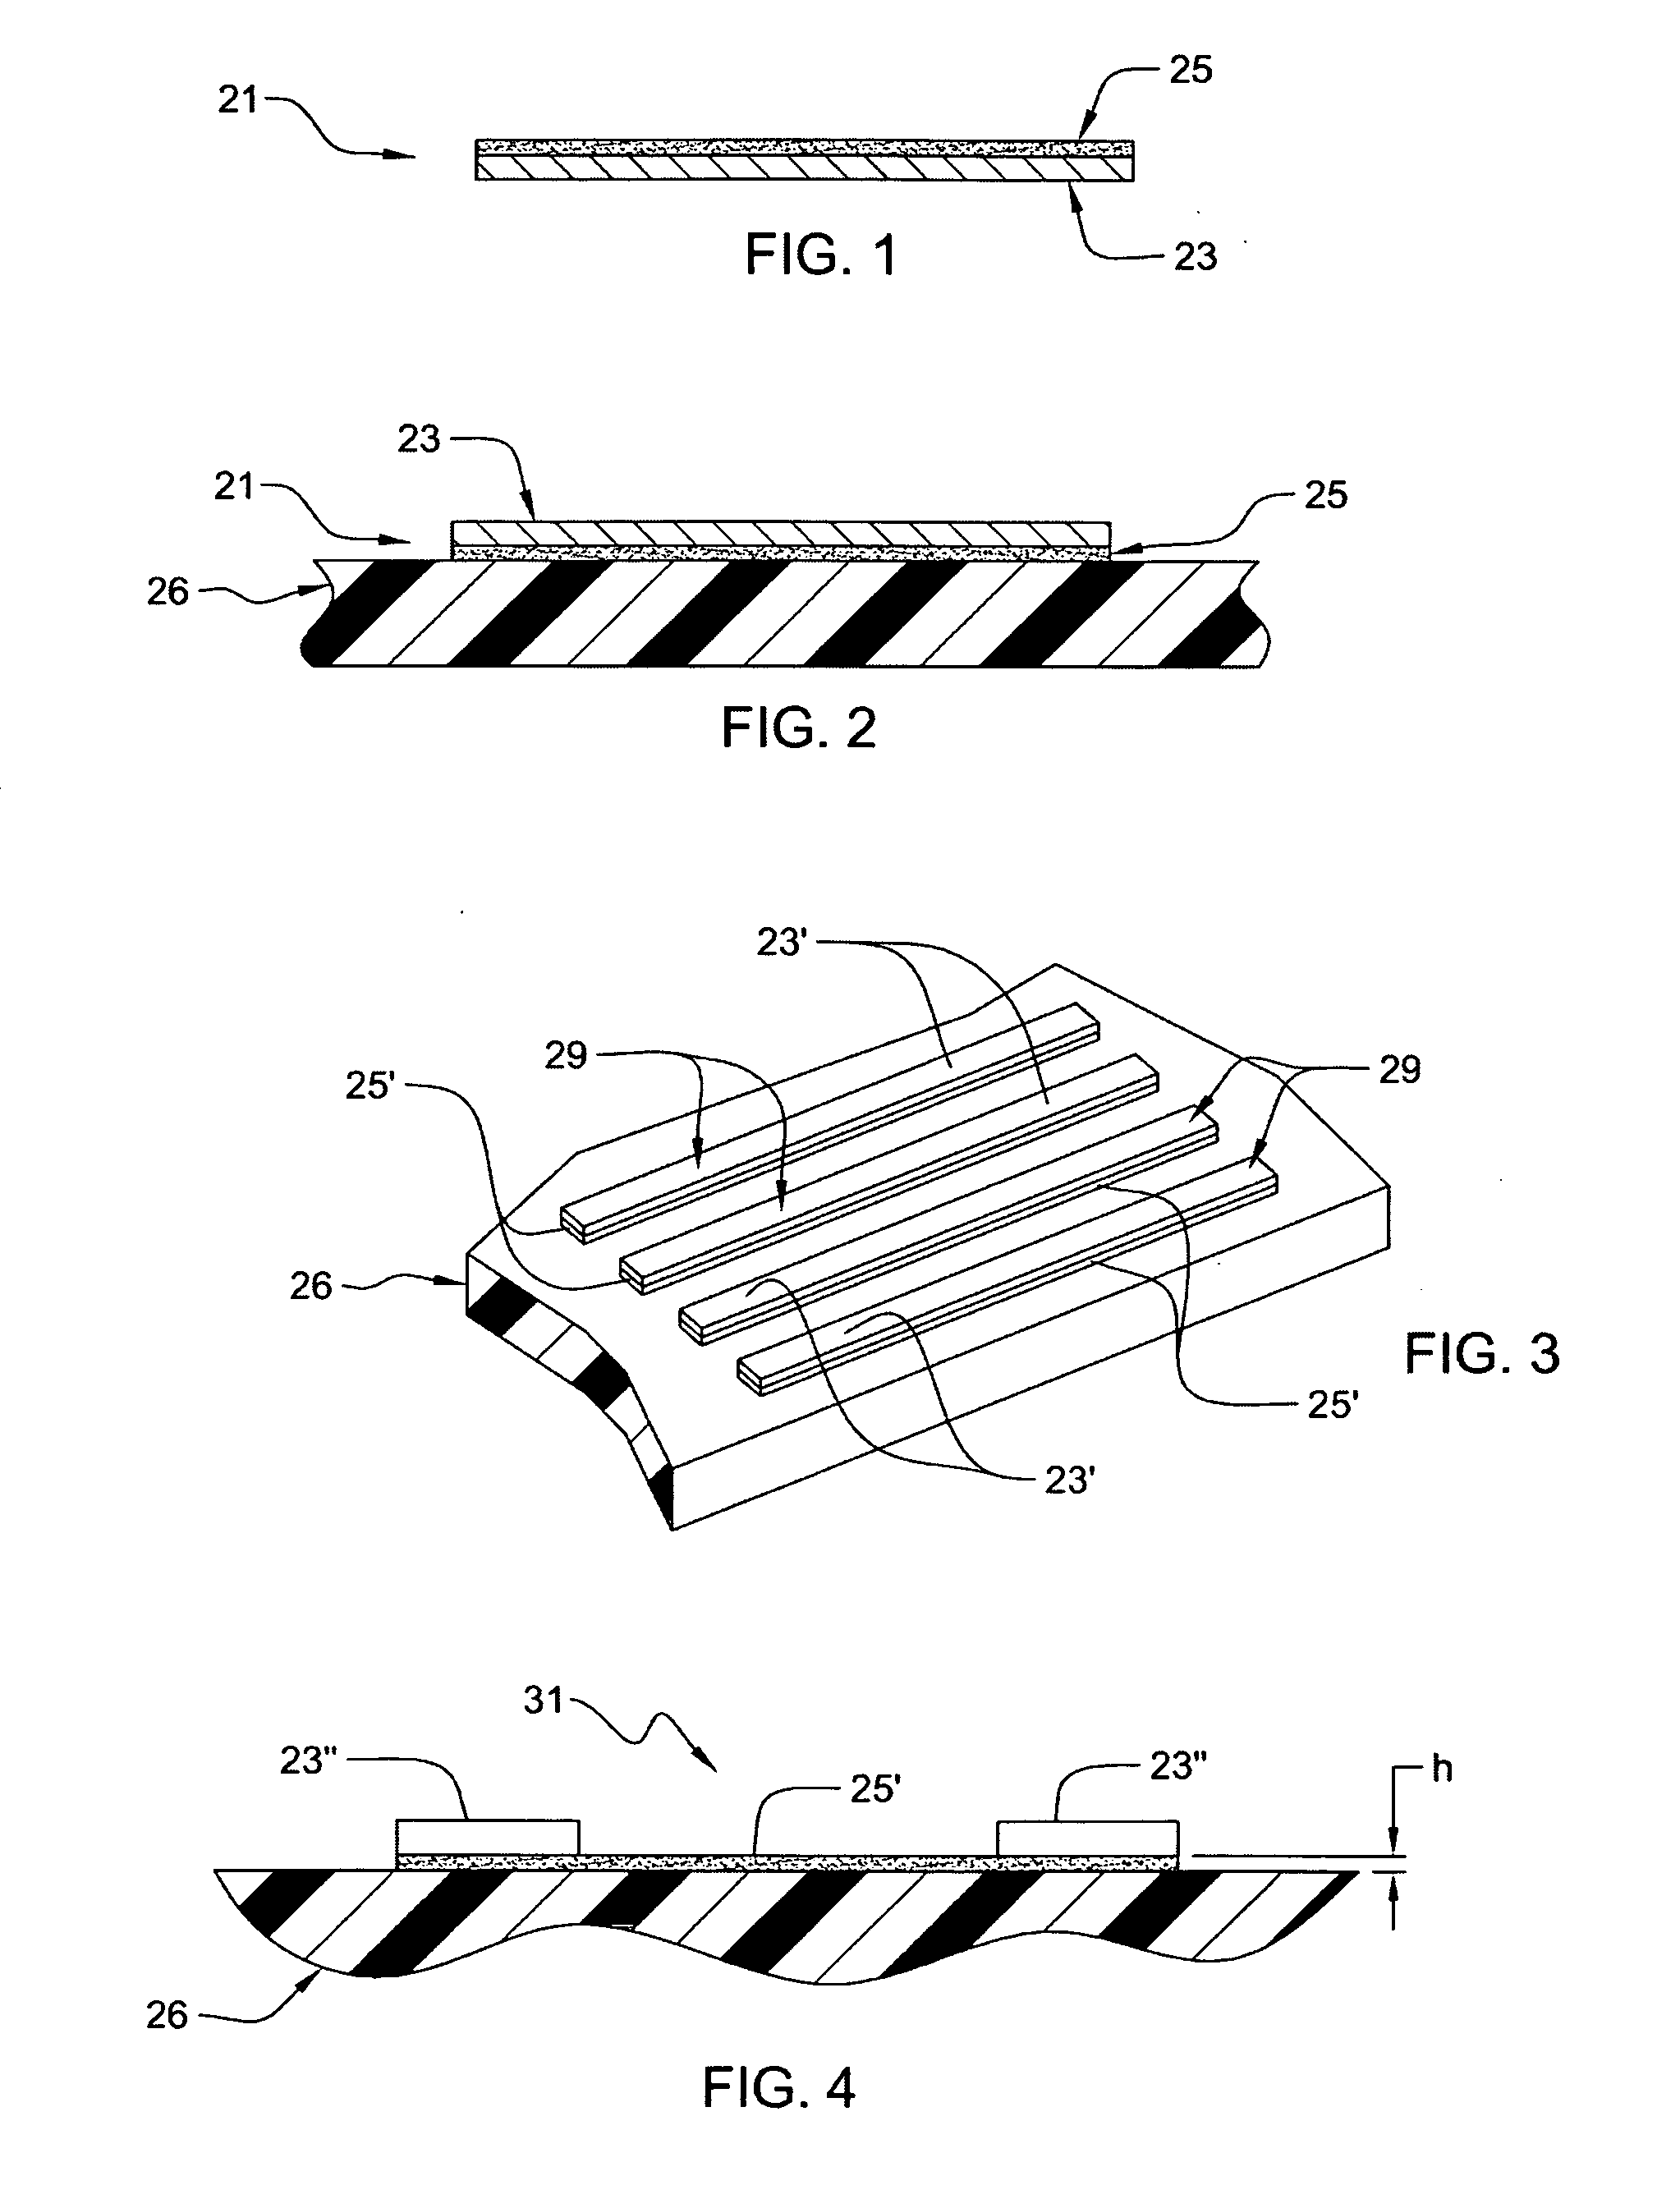 Method of making circuitized substrates having film resistors as part thereof